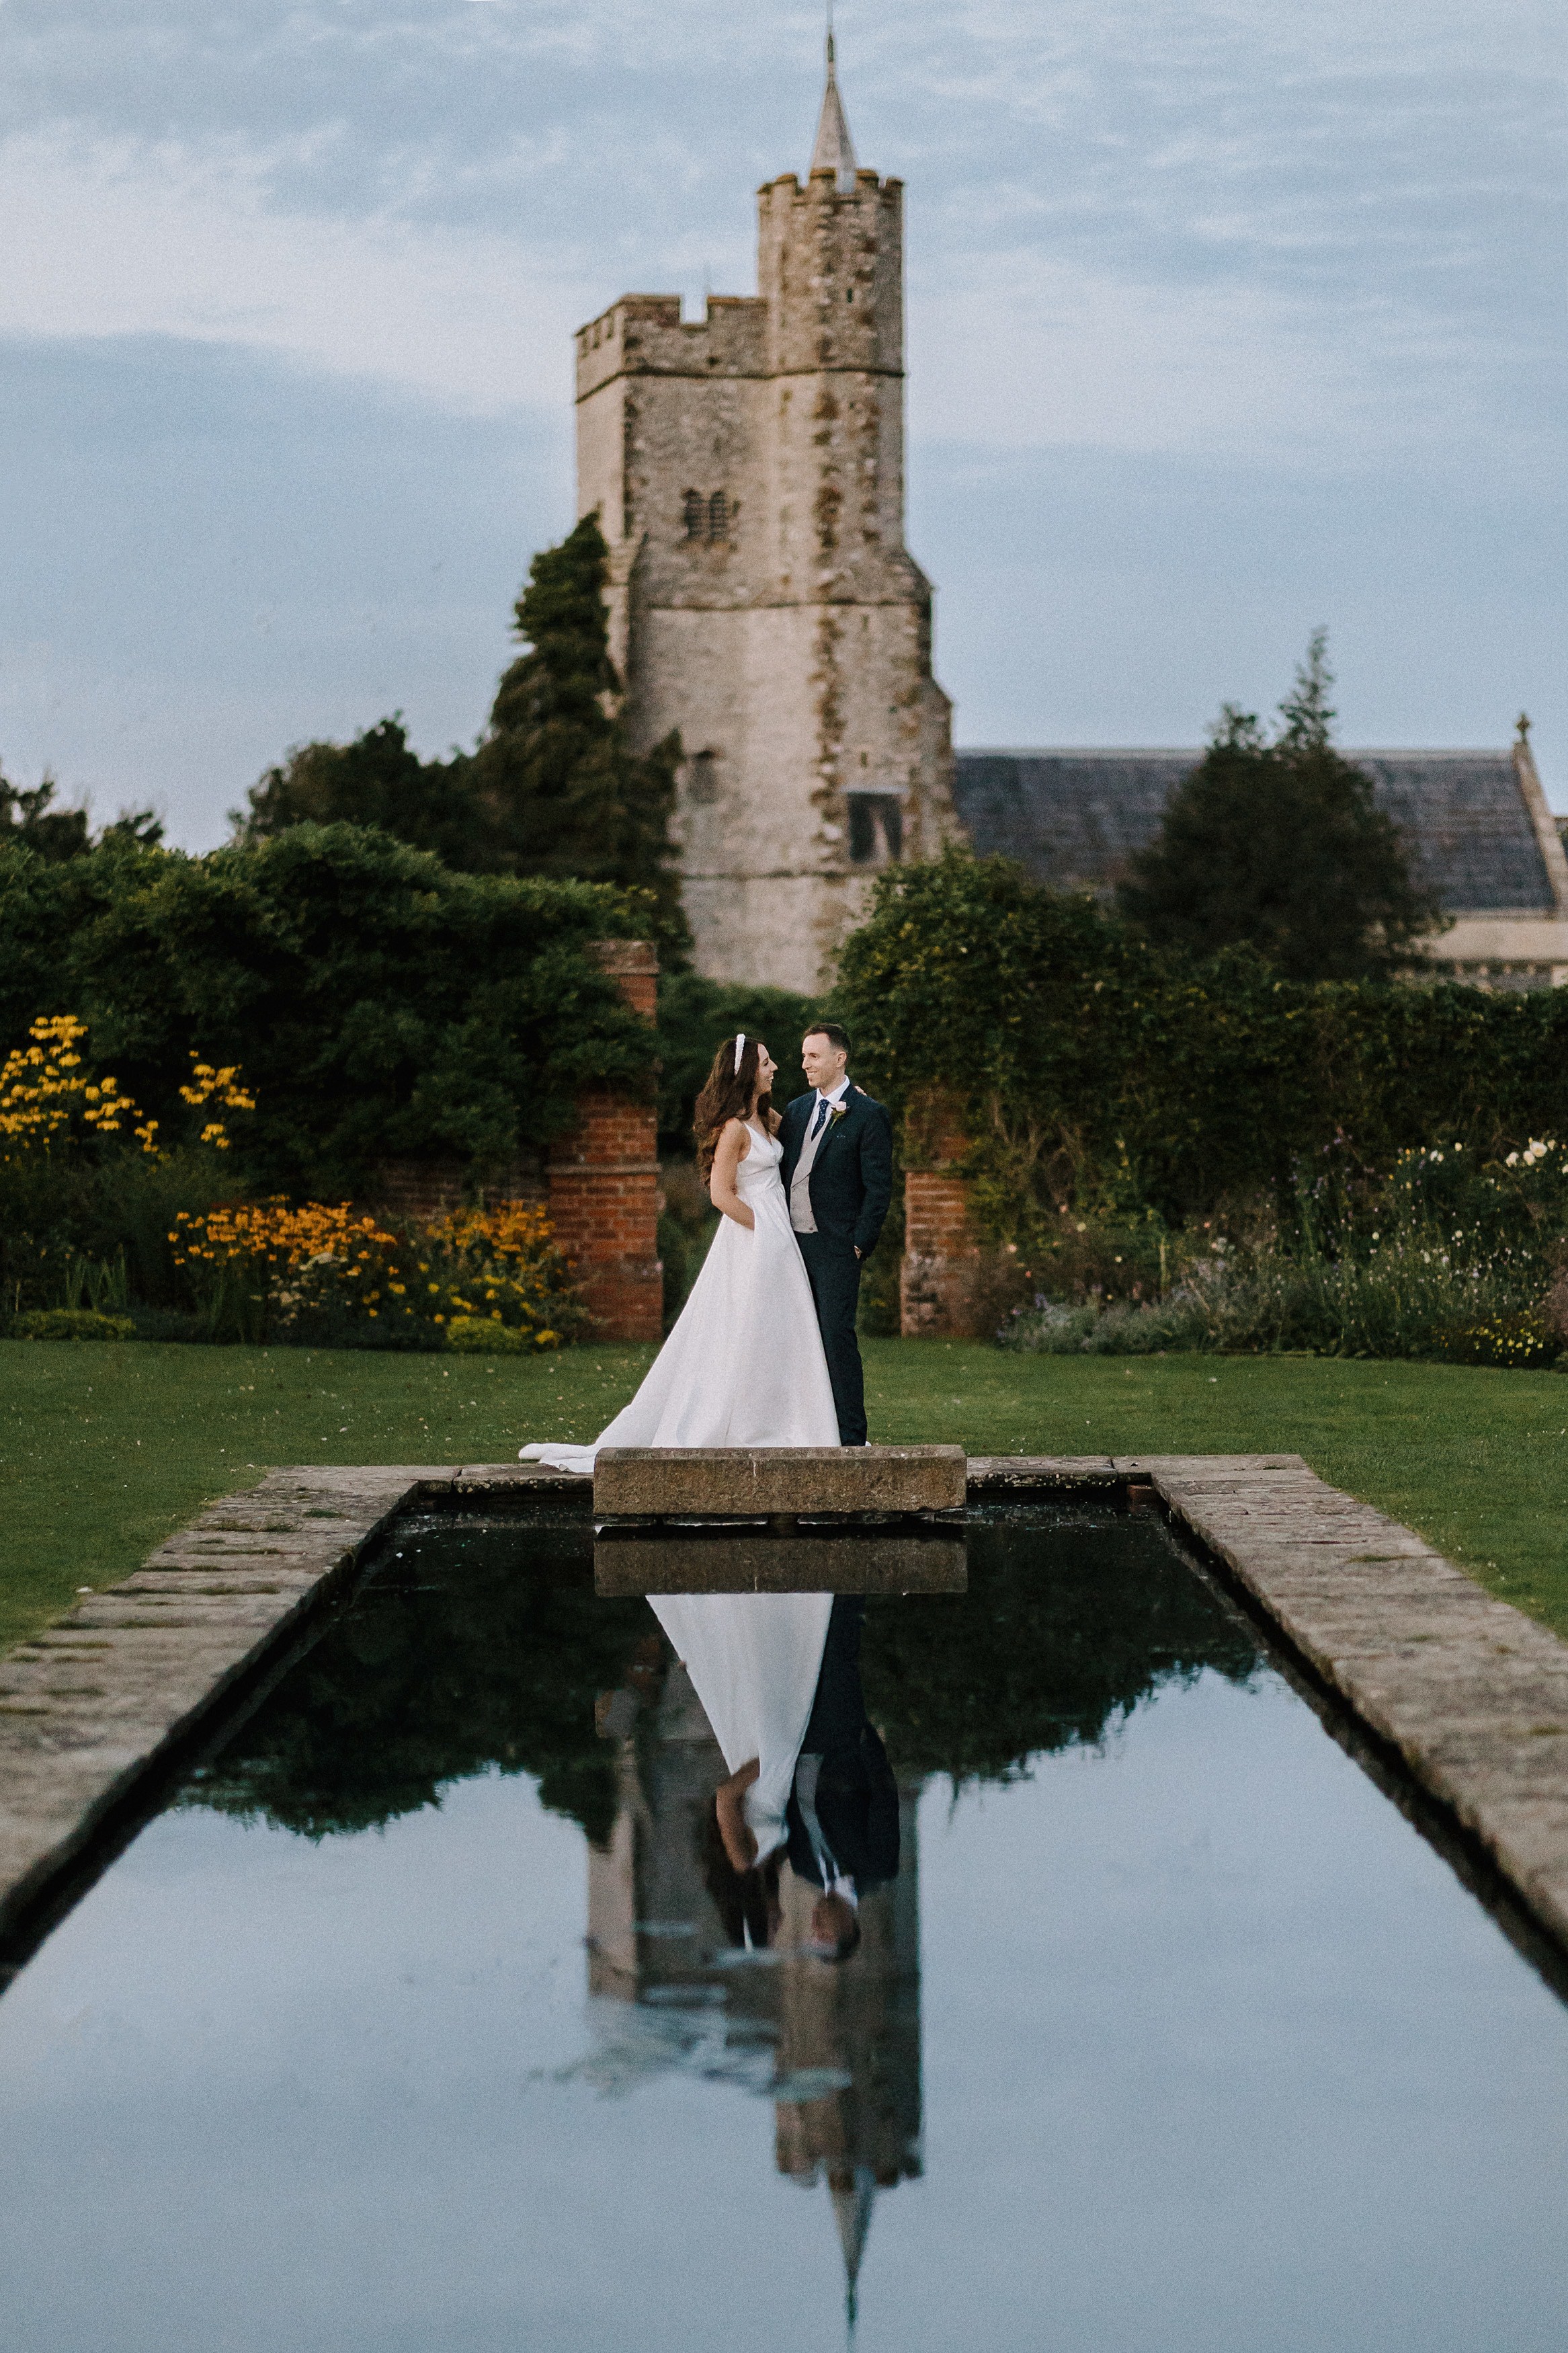 Th bride and groom smiling whilst being reflected in the pond in the walled garden at Goodnestone Park with the Church of Holy Cross behind them